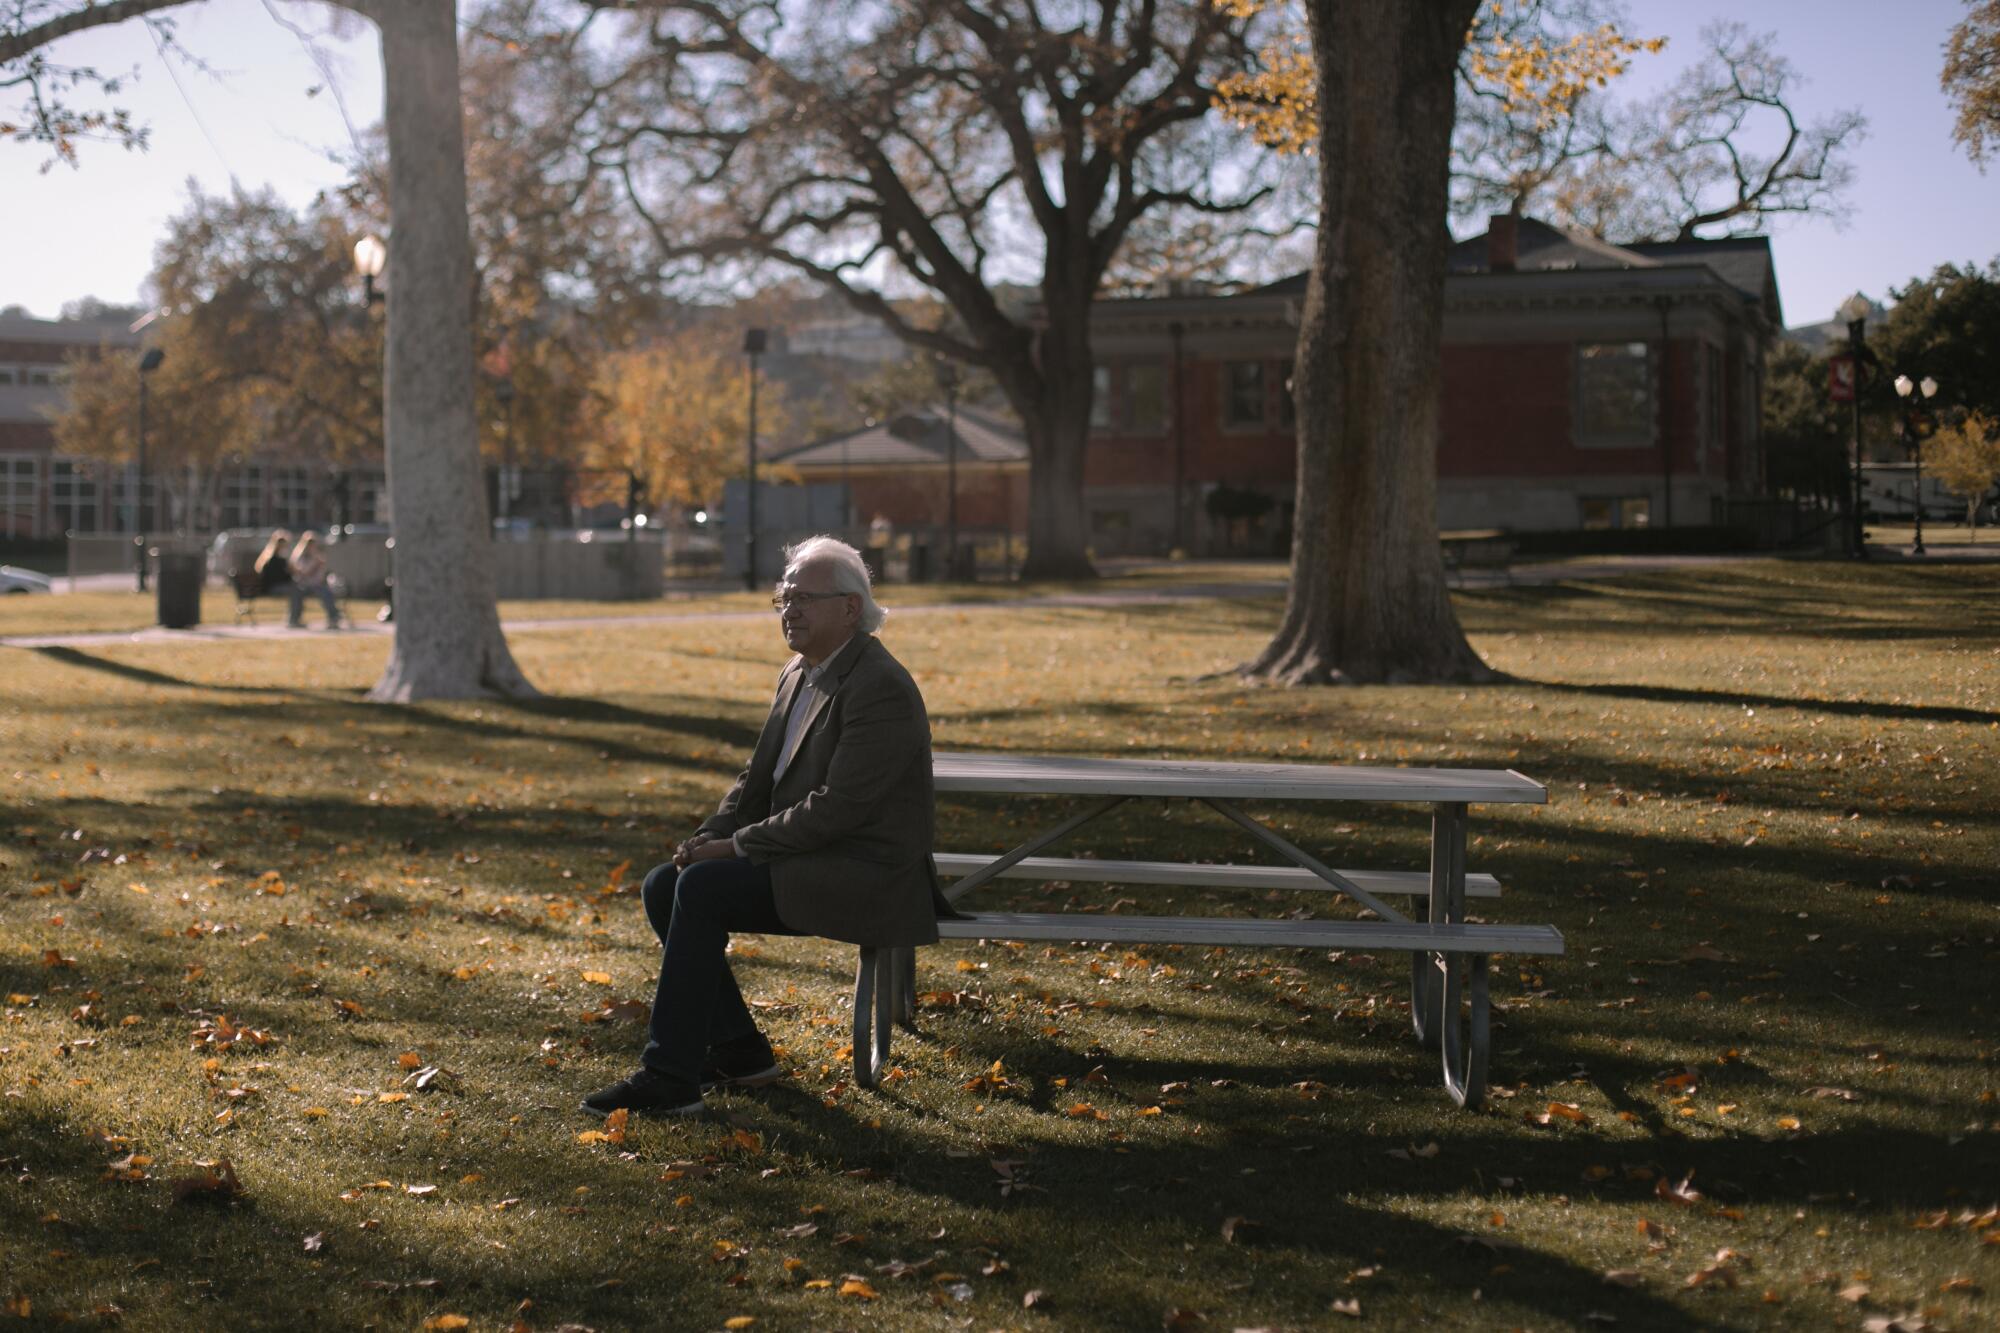 A white-haired man at a picnic table, looking into the distance as trees cast shadows across short grass littered with leaves